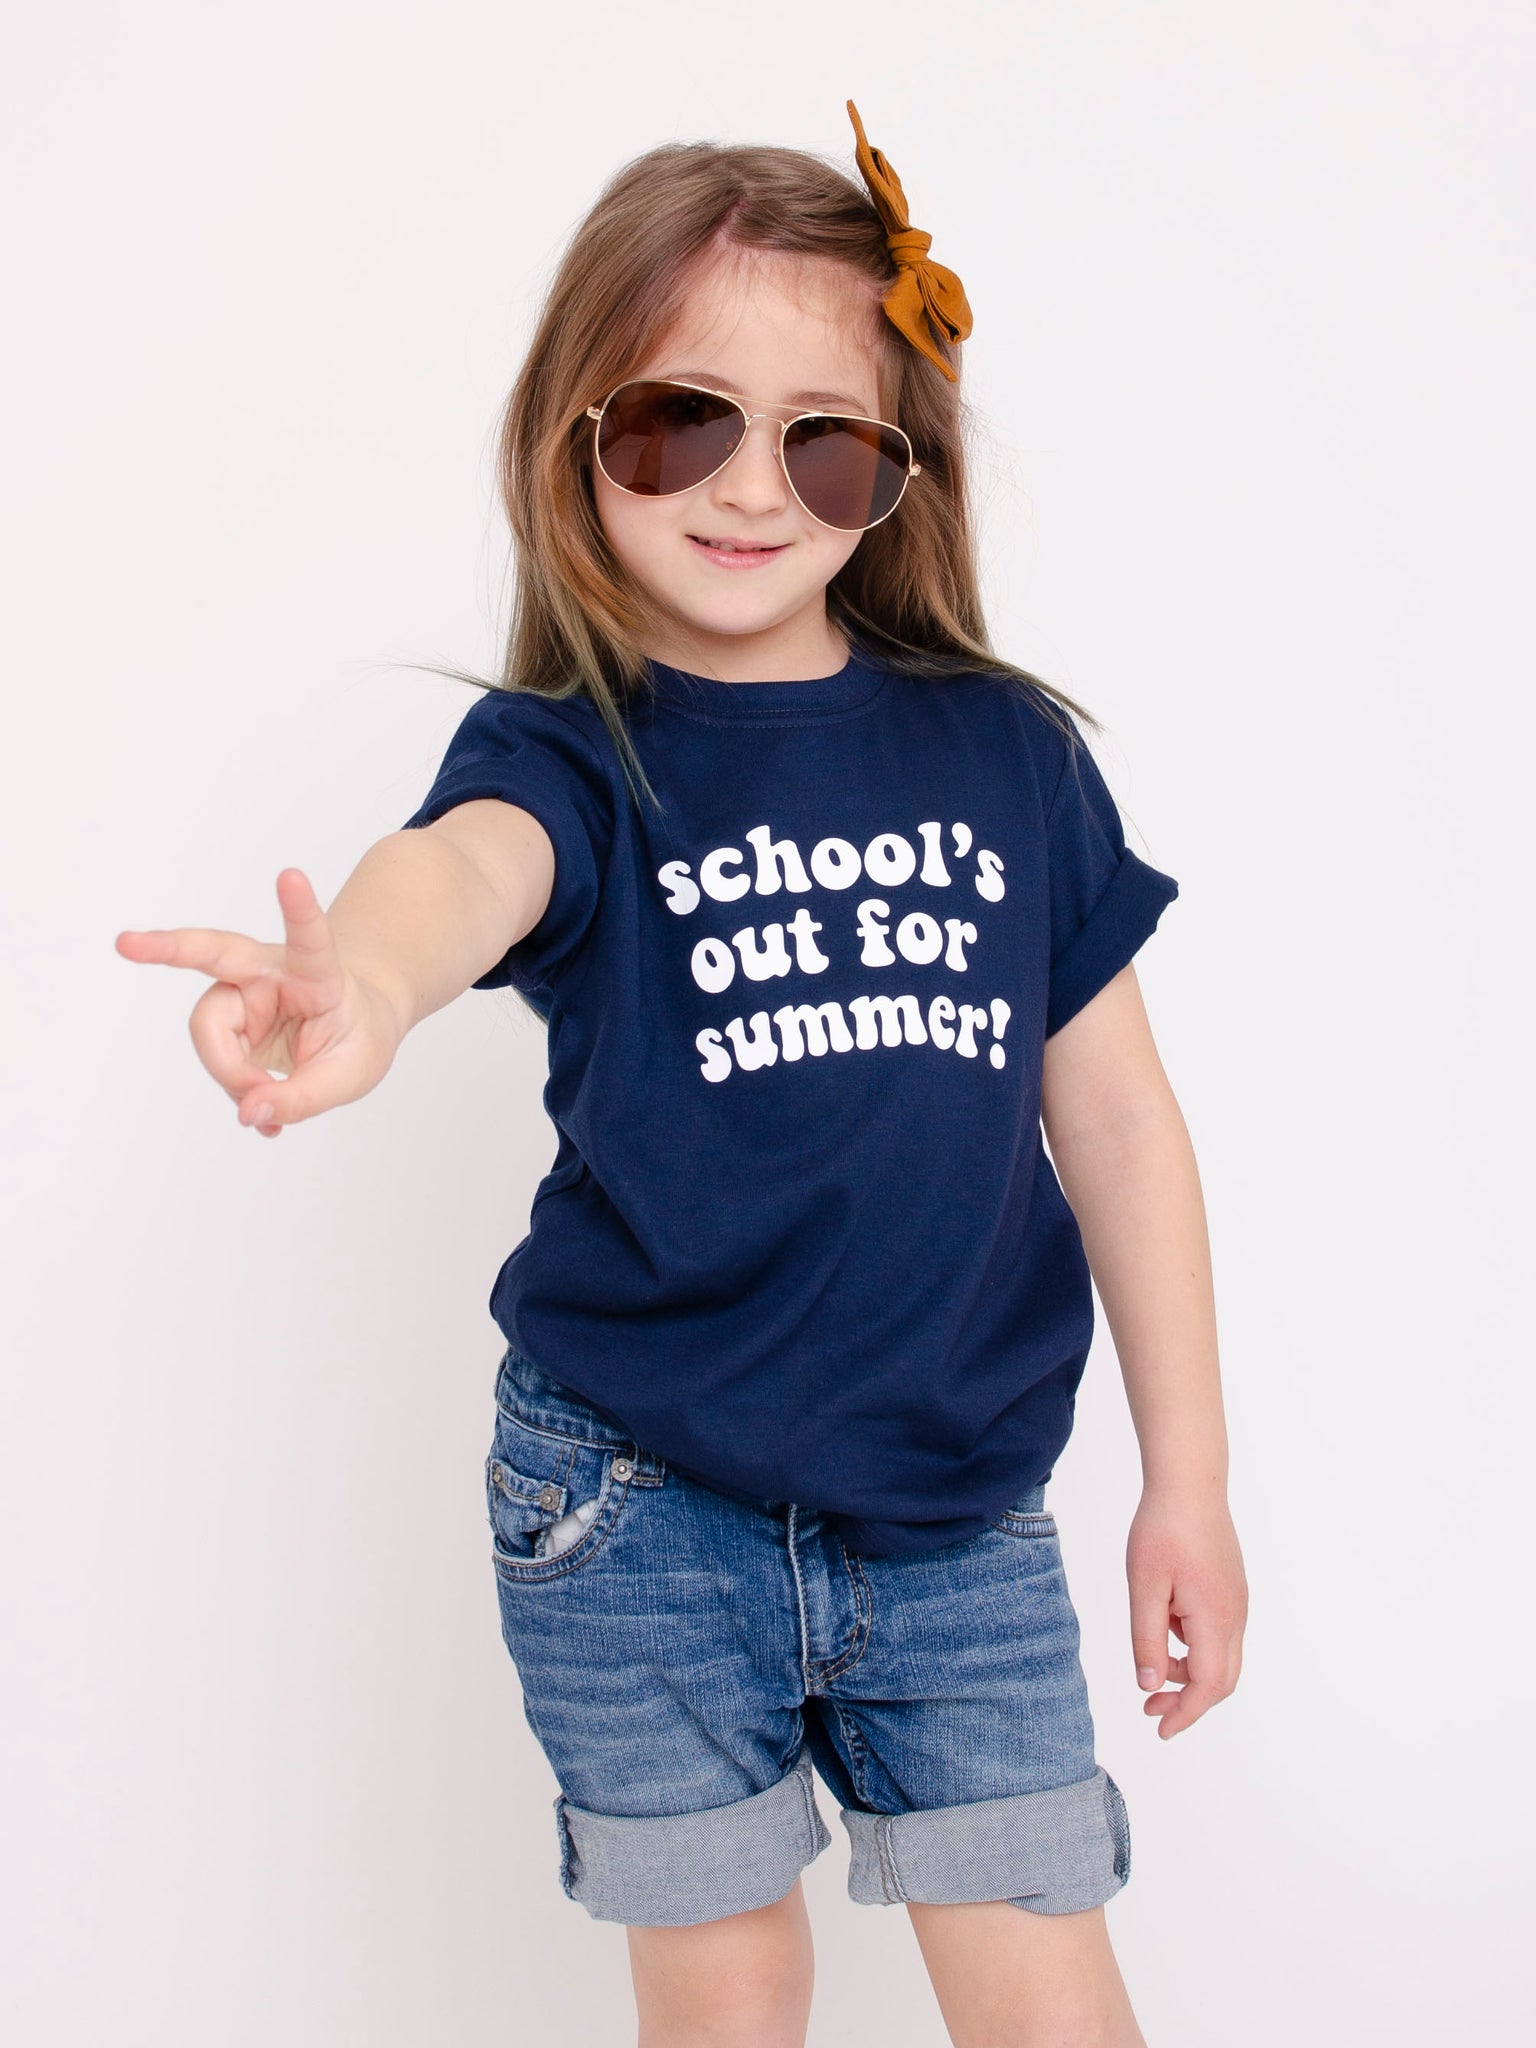 School's Out for Summer!